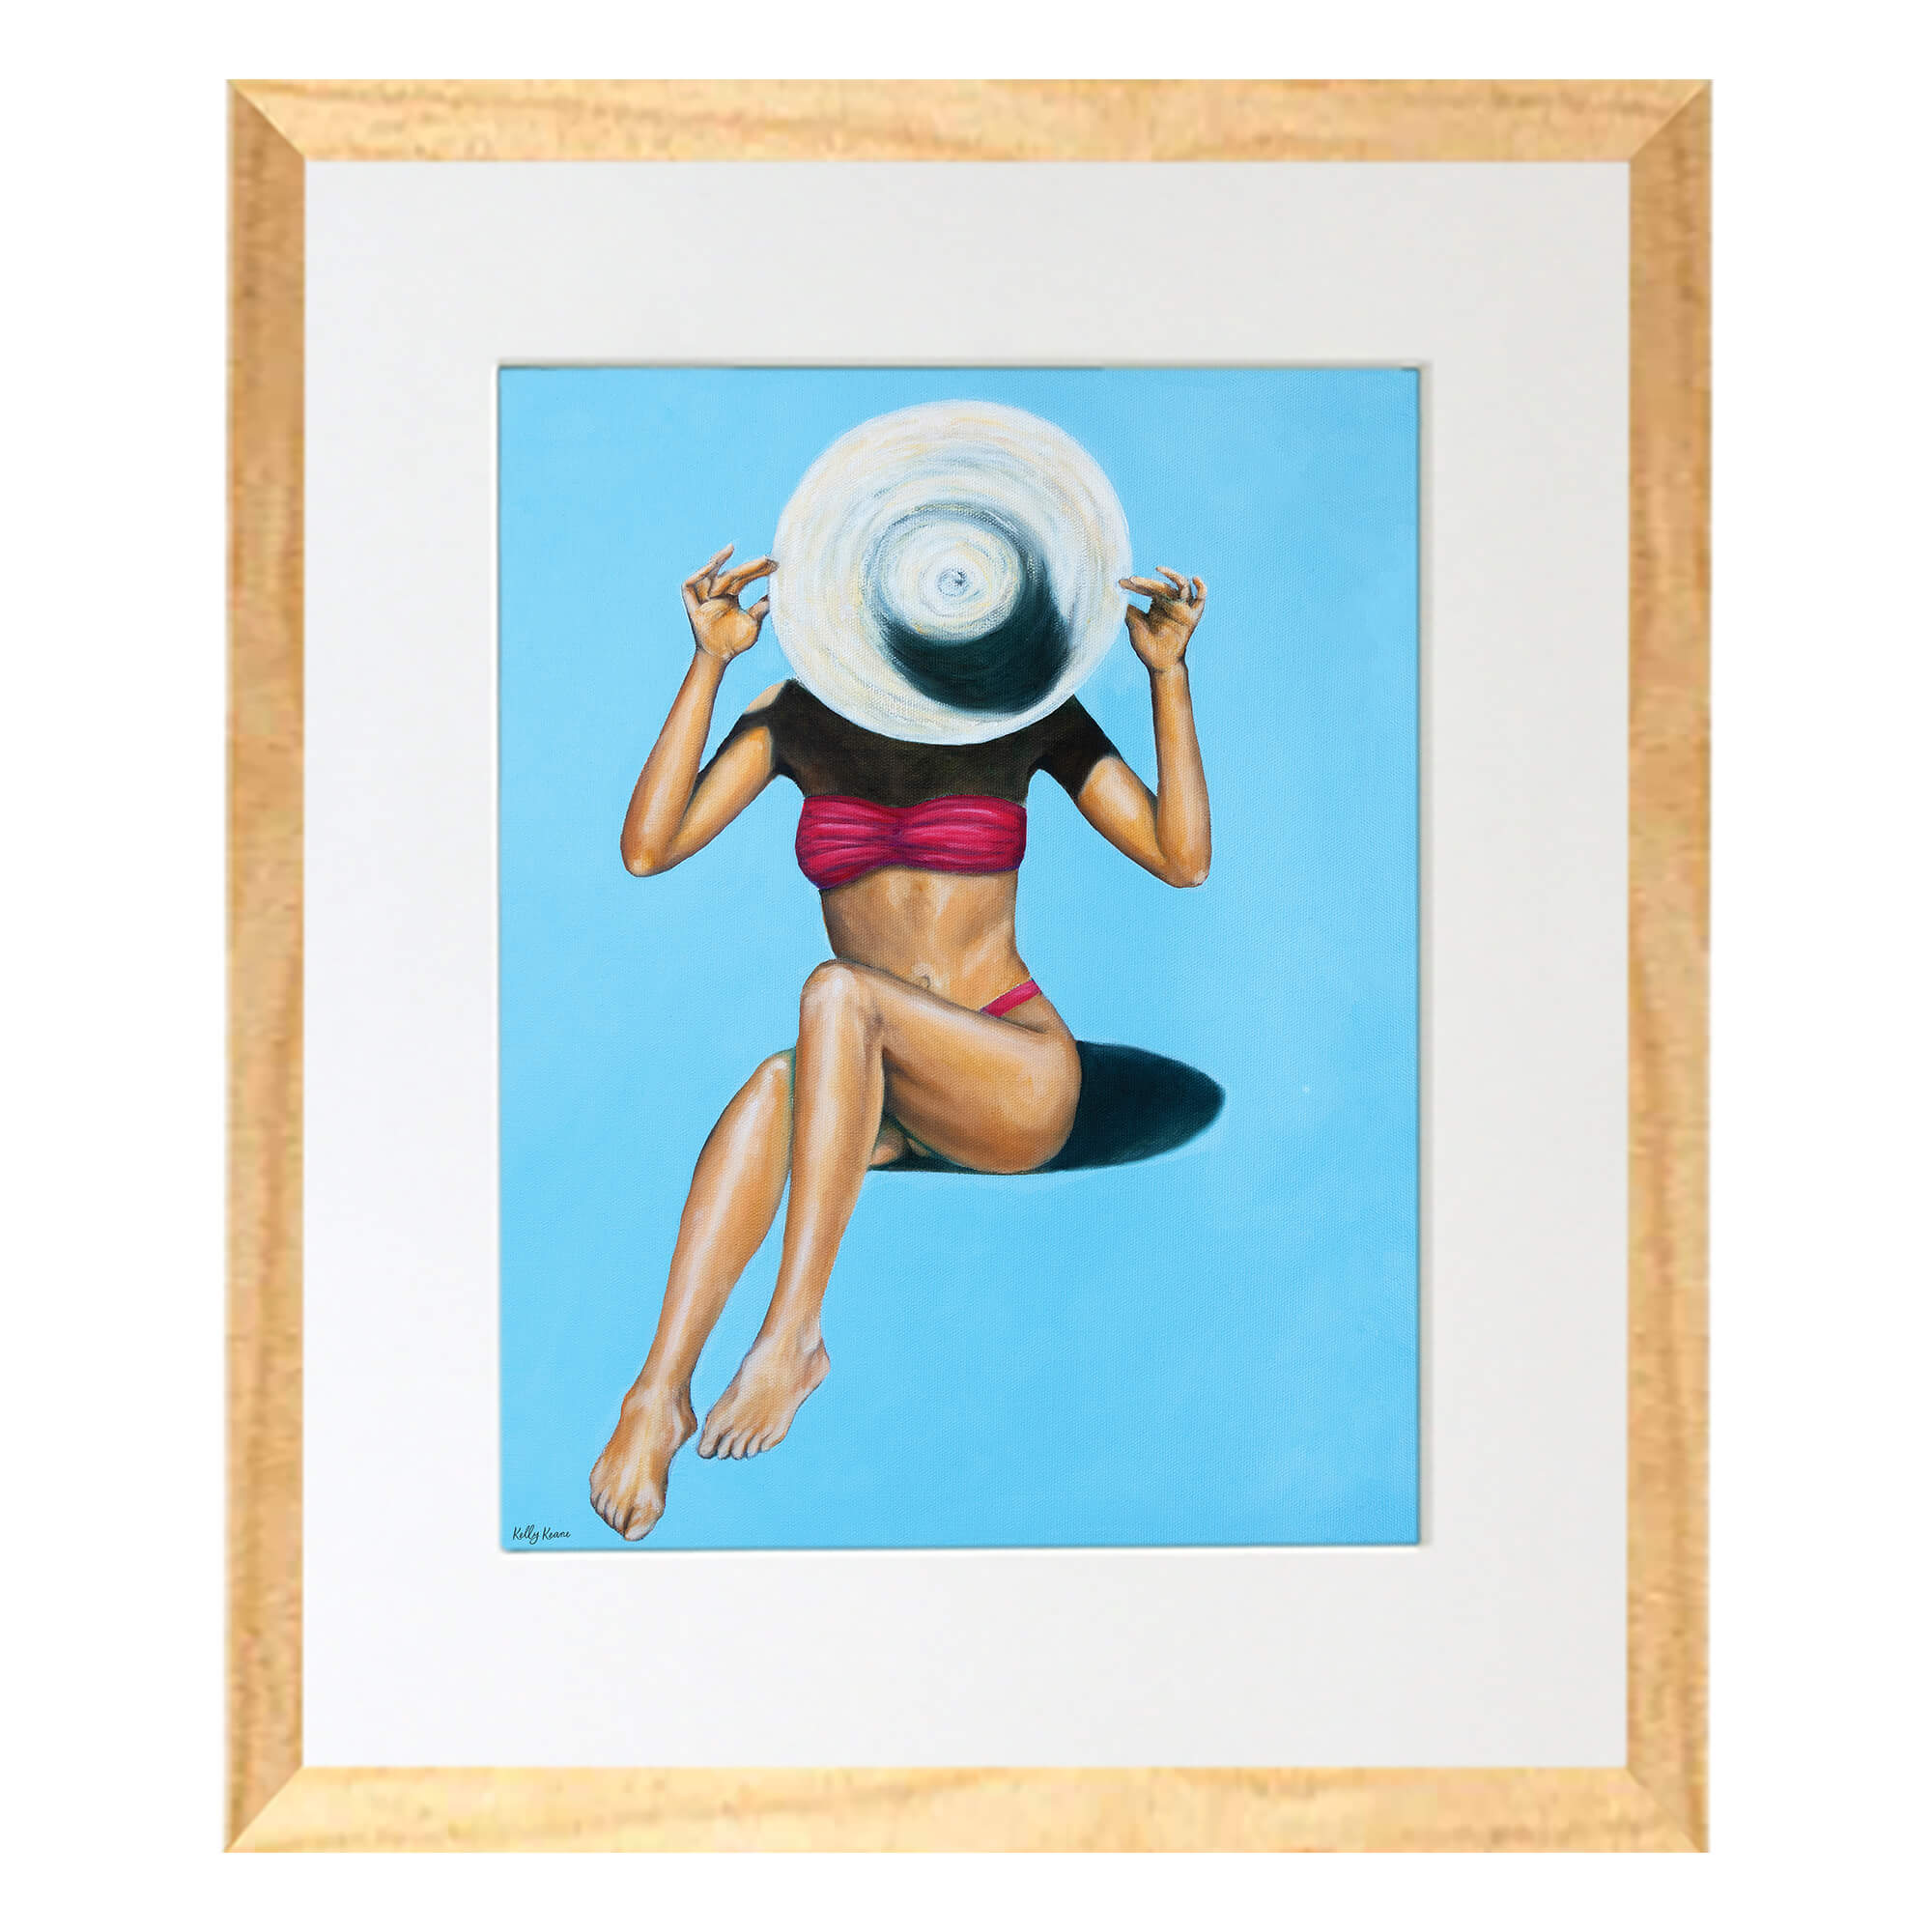 Matted art print featuring a woman under the sun by Hawaii artist Kelly Keane